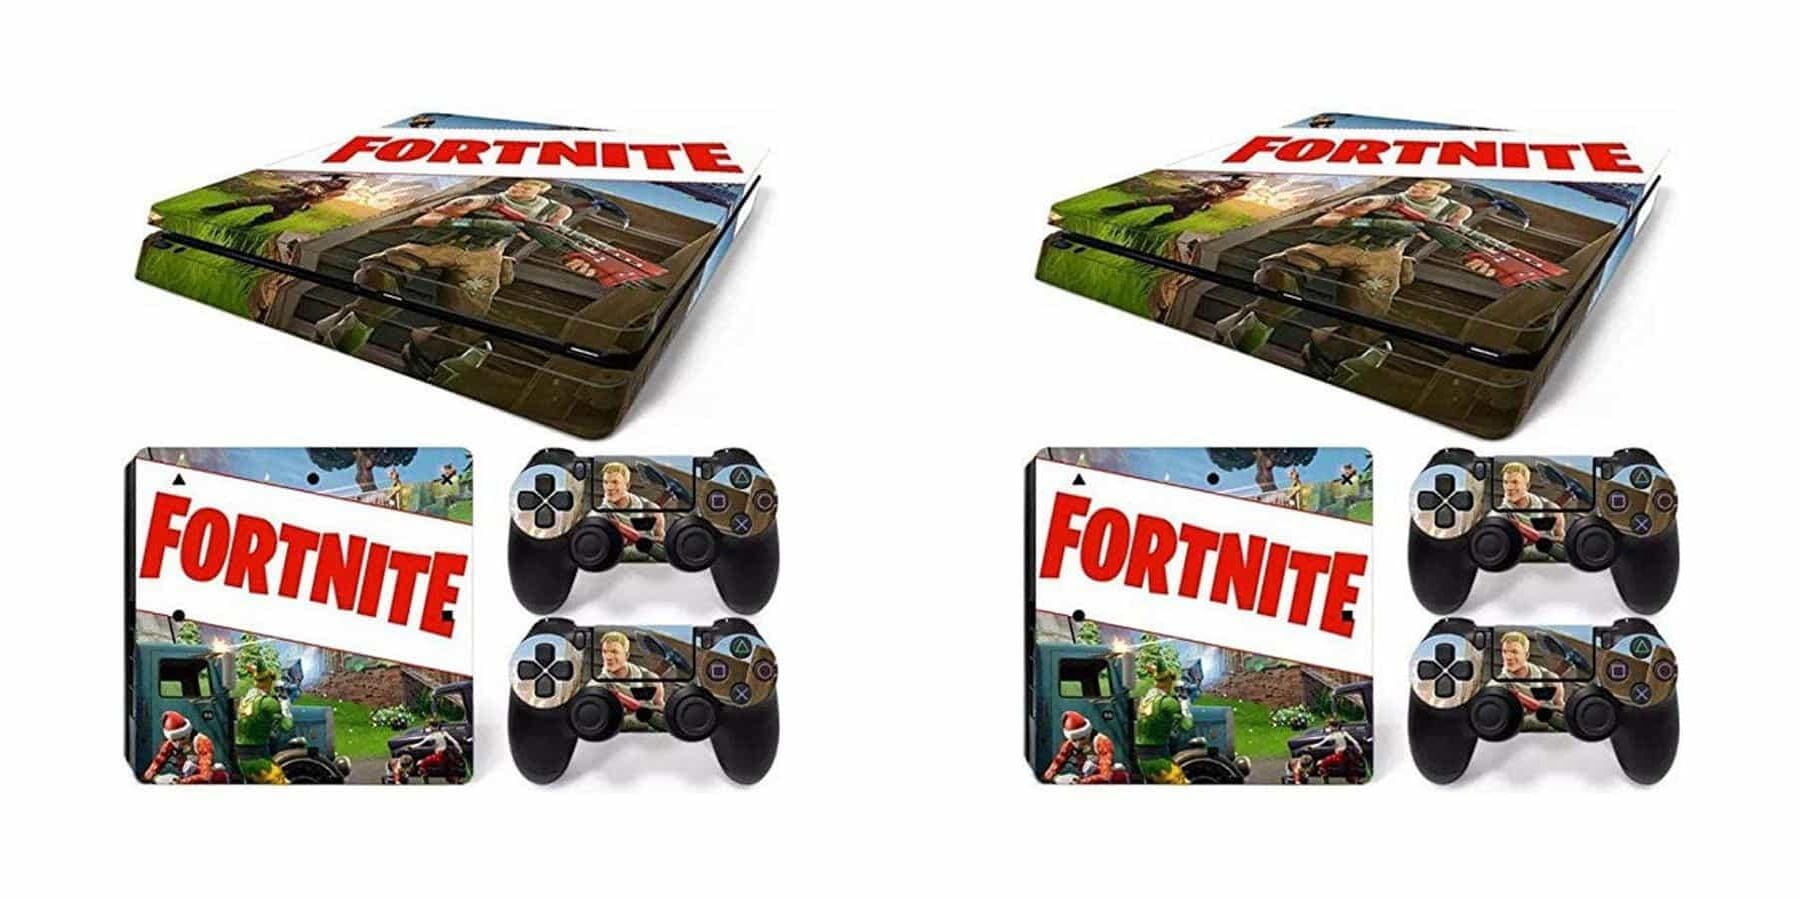 Set of 2 Fortnite Sticker for Sony PlayStation 4 Slim and Controllers - ST-CO-SE-1576